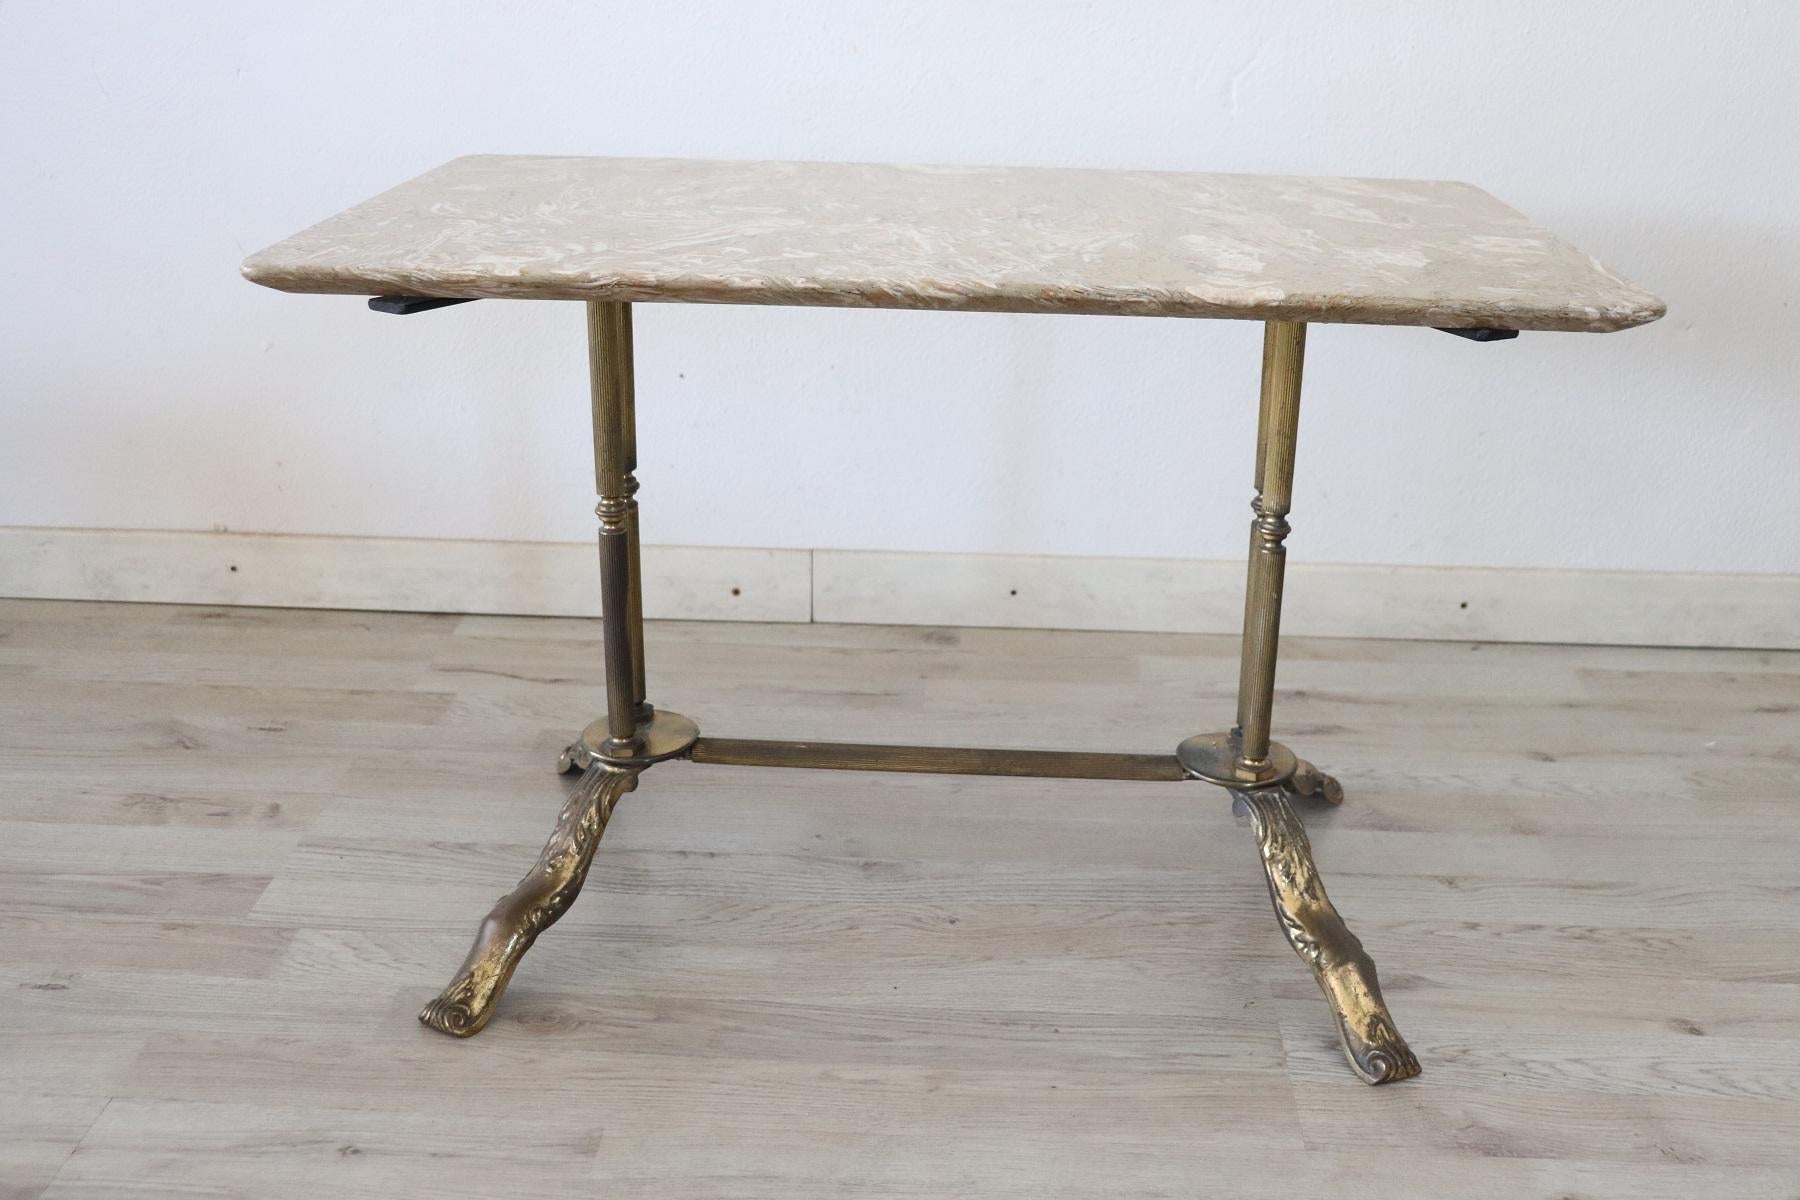 Rare and fine quality 1950s rectangular sofa table or coffee table. The table in precious gilded bronze. The top is in marble. The bronze shows signs of wear and ancient patina.